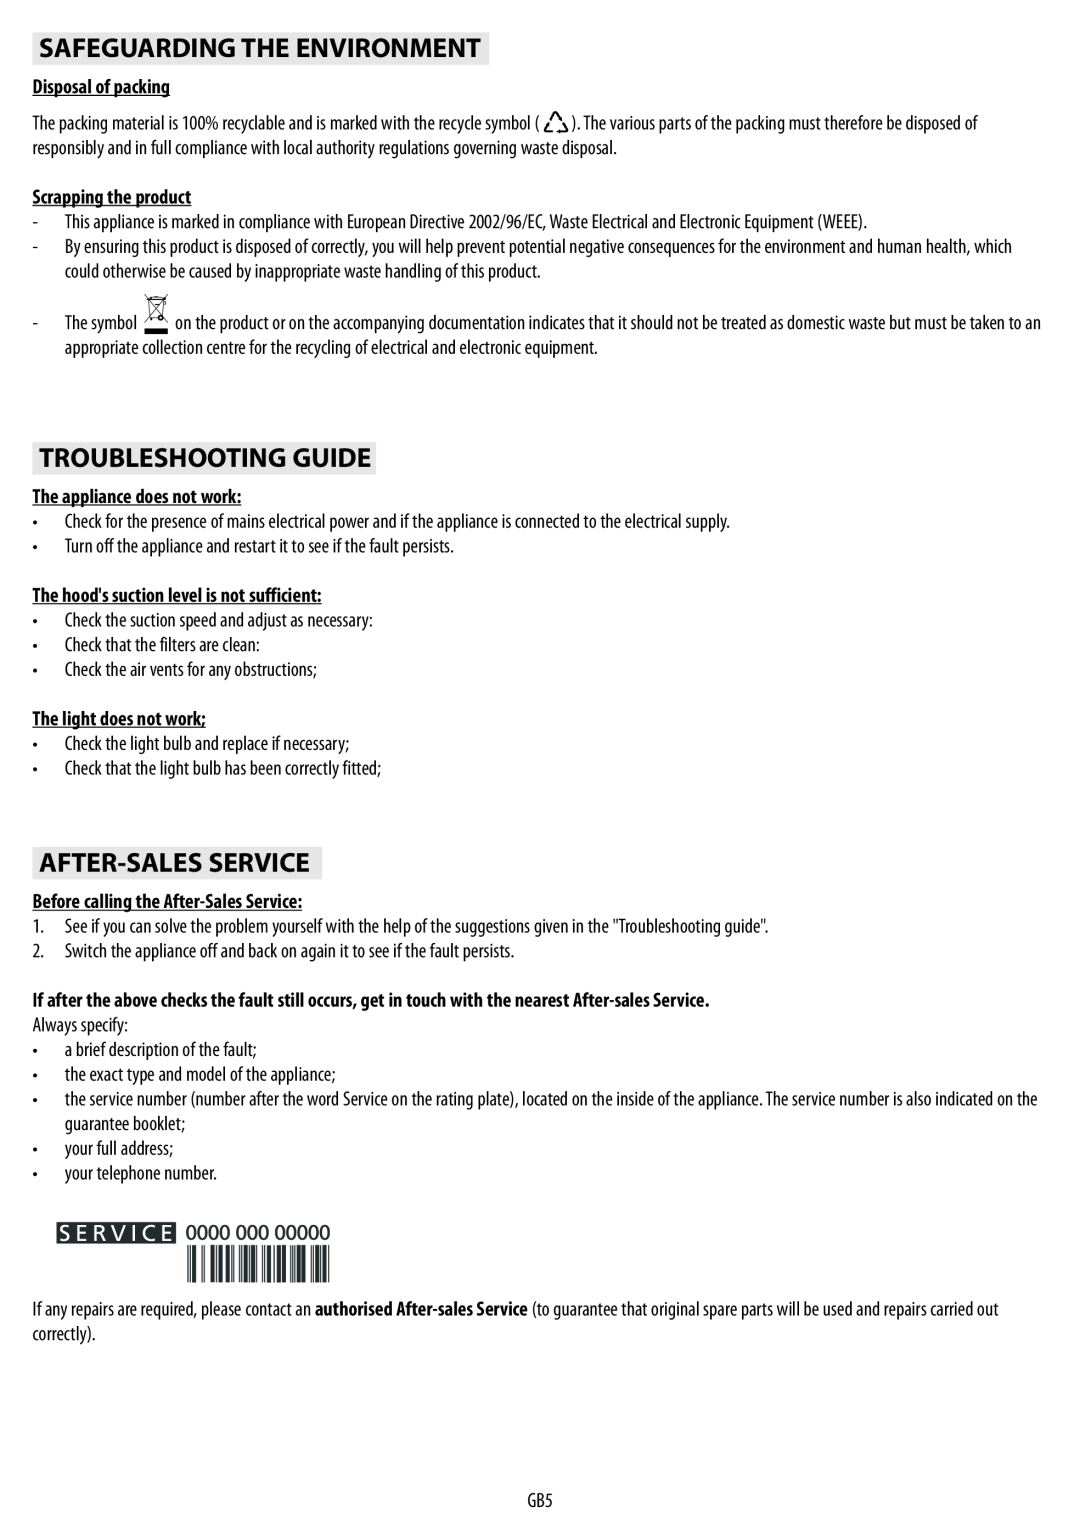 IKEA HW320 manual Safeguarding The Environment, Troubleshooting Guide, After-Sales Service, Disposal of packing 